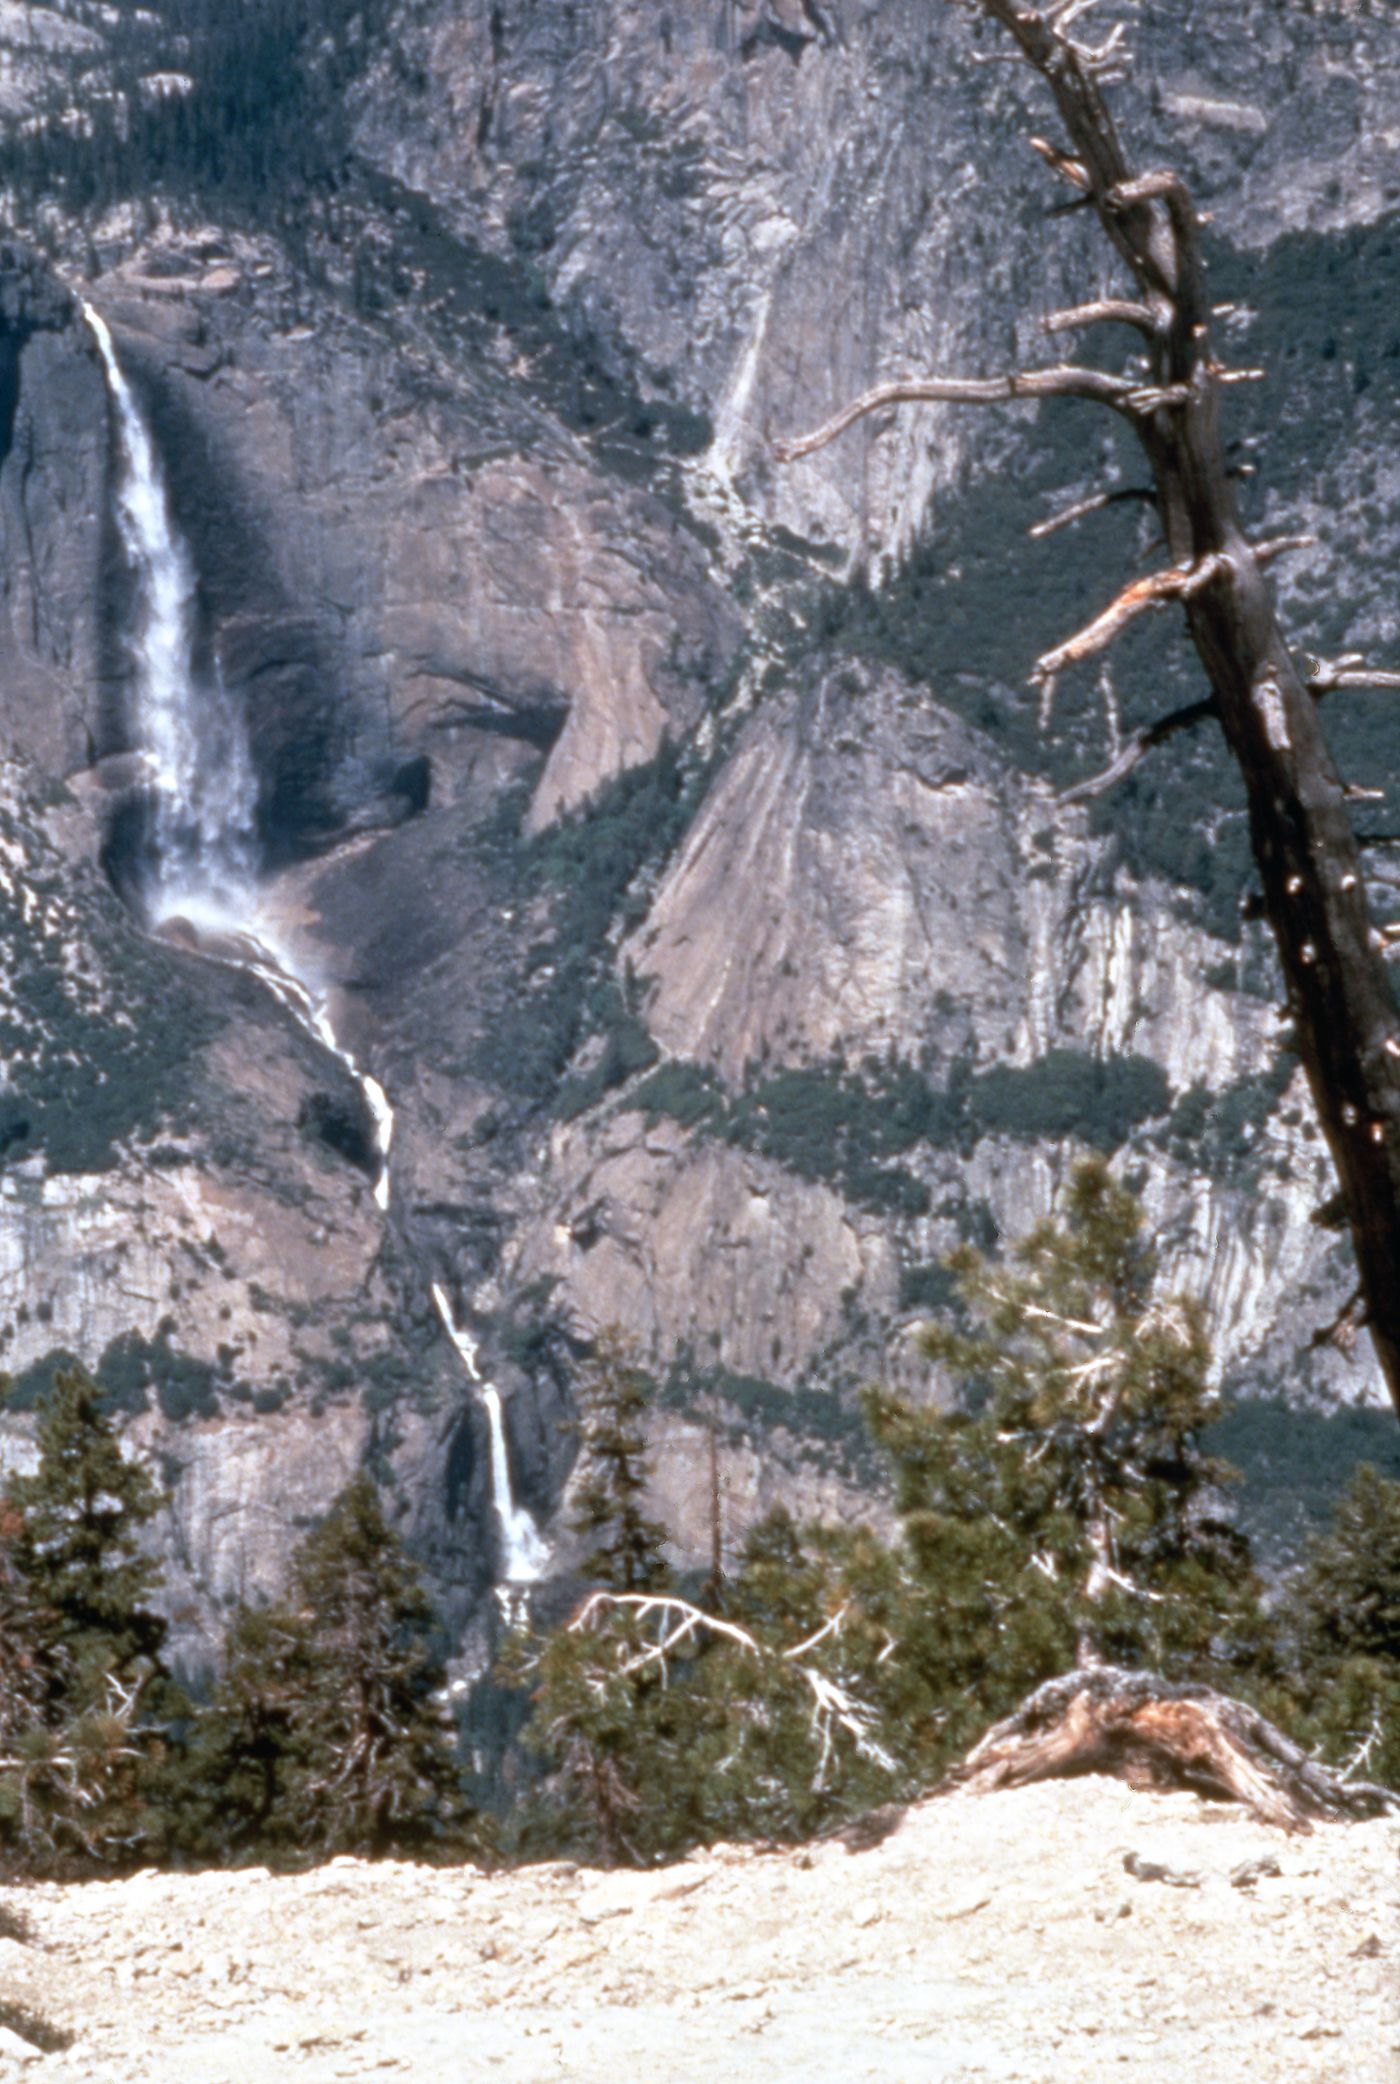 Photograph of waterfall and mountains for research for Olmsted: L'origine del parco urbano e del parco naturale contemporaneo